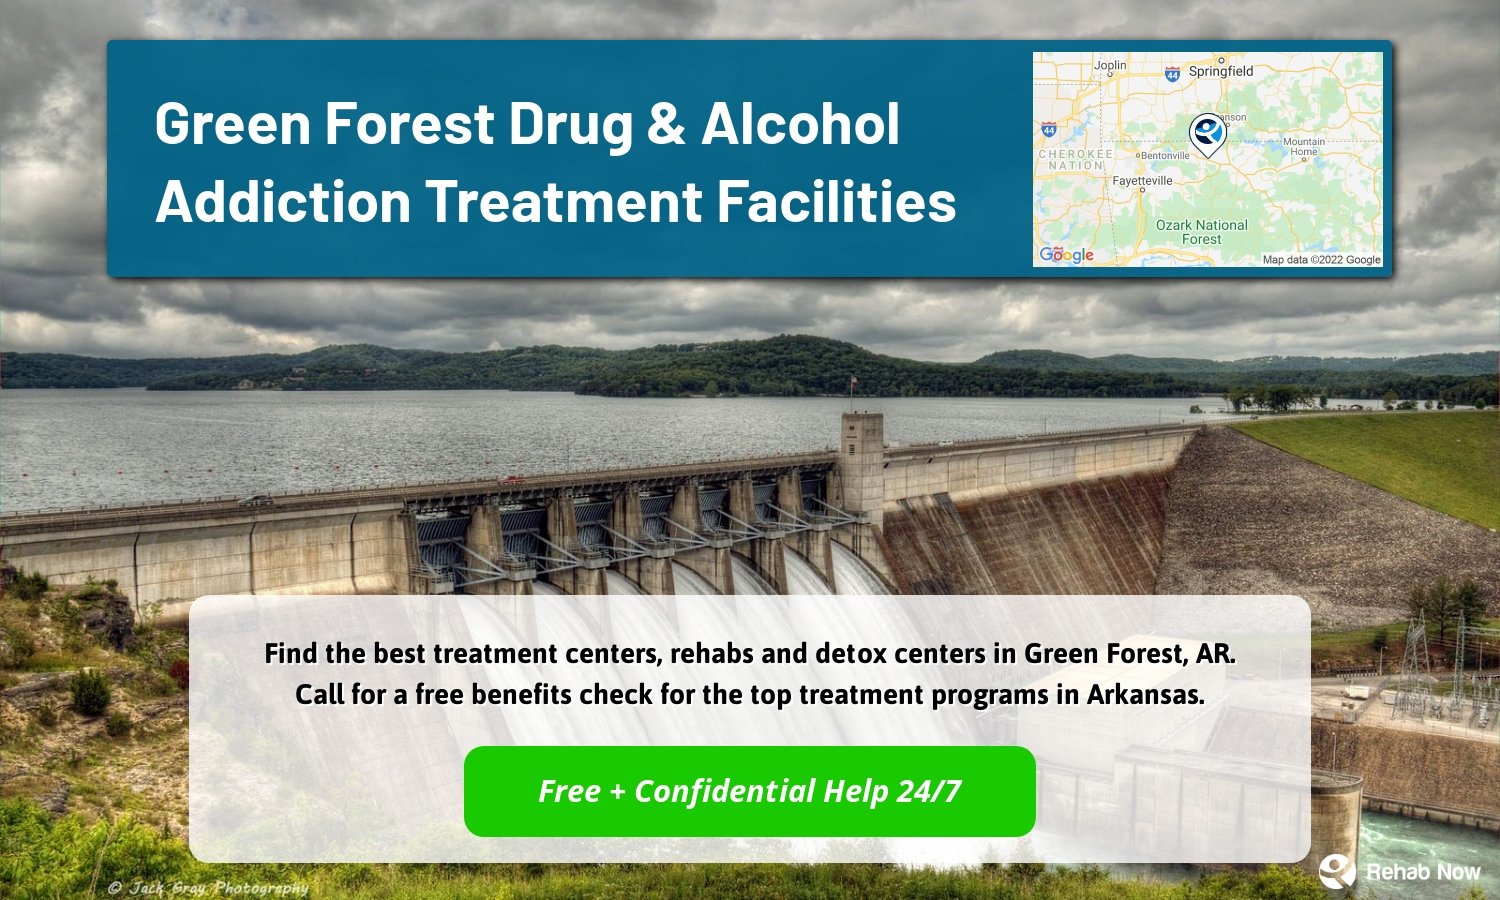 Find the best treatment centers, rehabs and detox centers in Green Forest, AR. Call for a free benefits check for the top treatment programs in Arkansas.